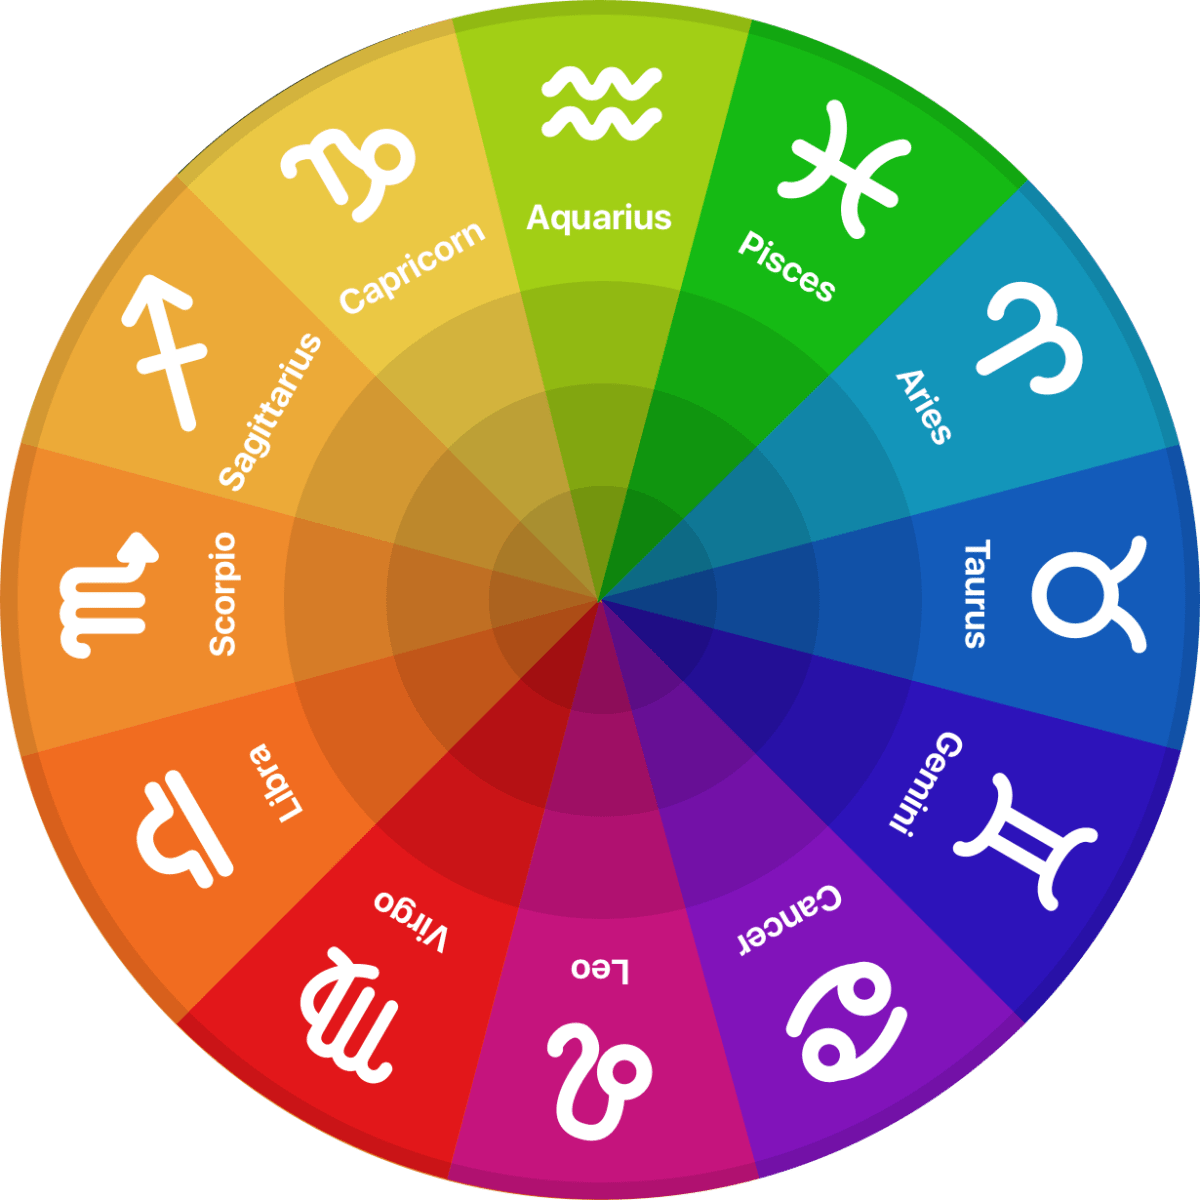 Look on the outer of the chart wheel to find what Astrological Sign is at the house your North Node is in (You can search "Astrology Signs" on Google to know what sign yours is in, this wheel is also an example and will not be the same for everyone else's chart)